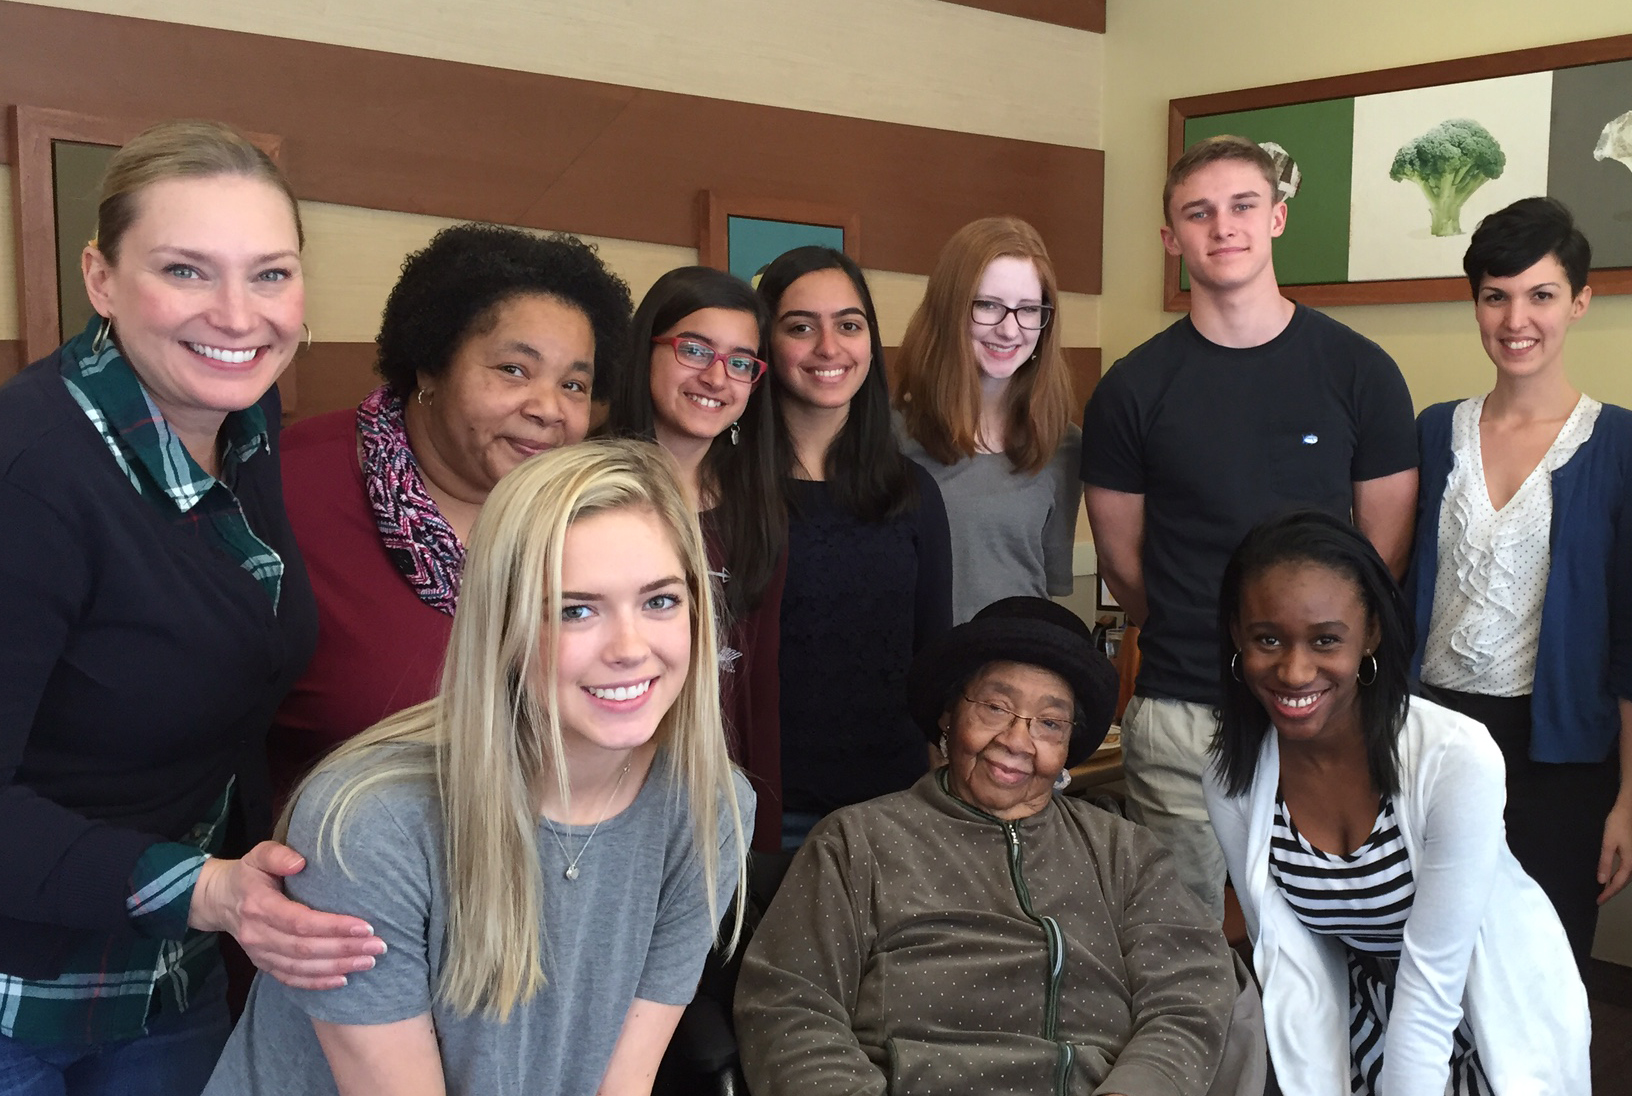 The students had a chance to meet and interview two former ACS students. This picture was taken after their lunch with one of the past students, Ms. Yvonne Neal. This is just one of the many amazing opportunities that the students have had as part of this project. (Courtesy Shannon Knipmeyer)